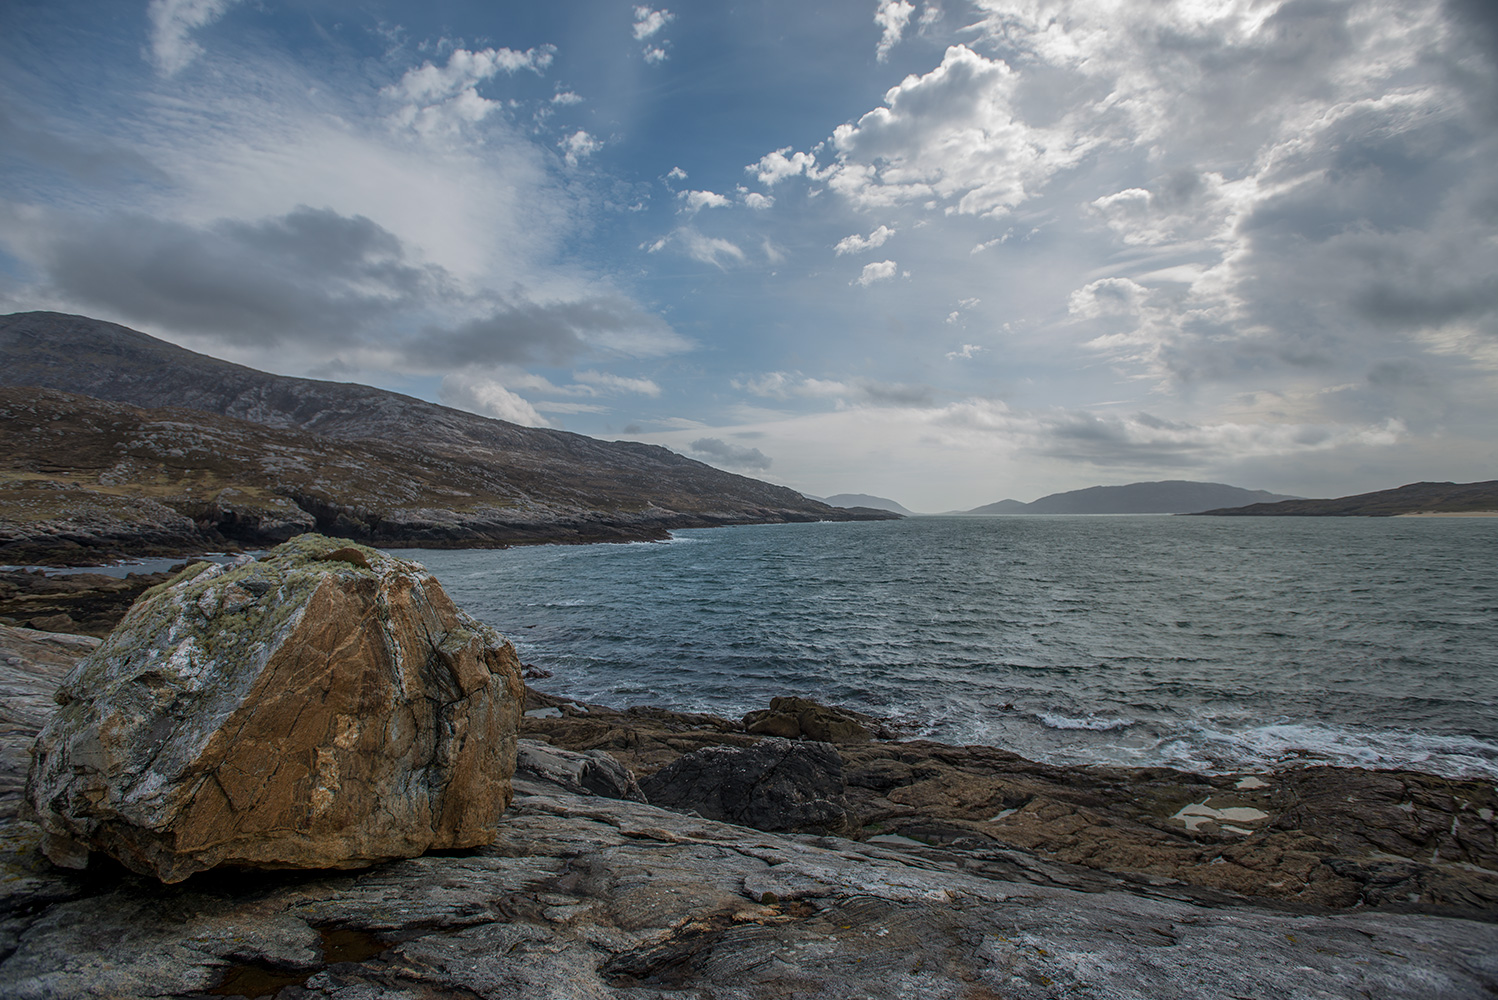 At the end of the road down the western coast. The view south.Nikon D600, 17-35mm